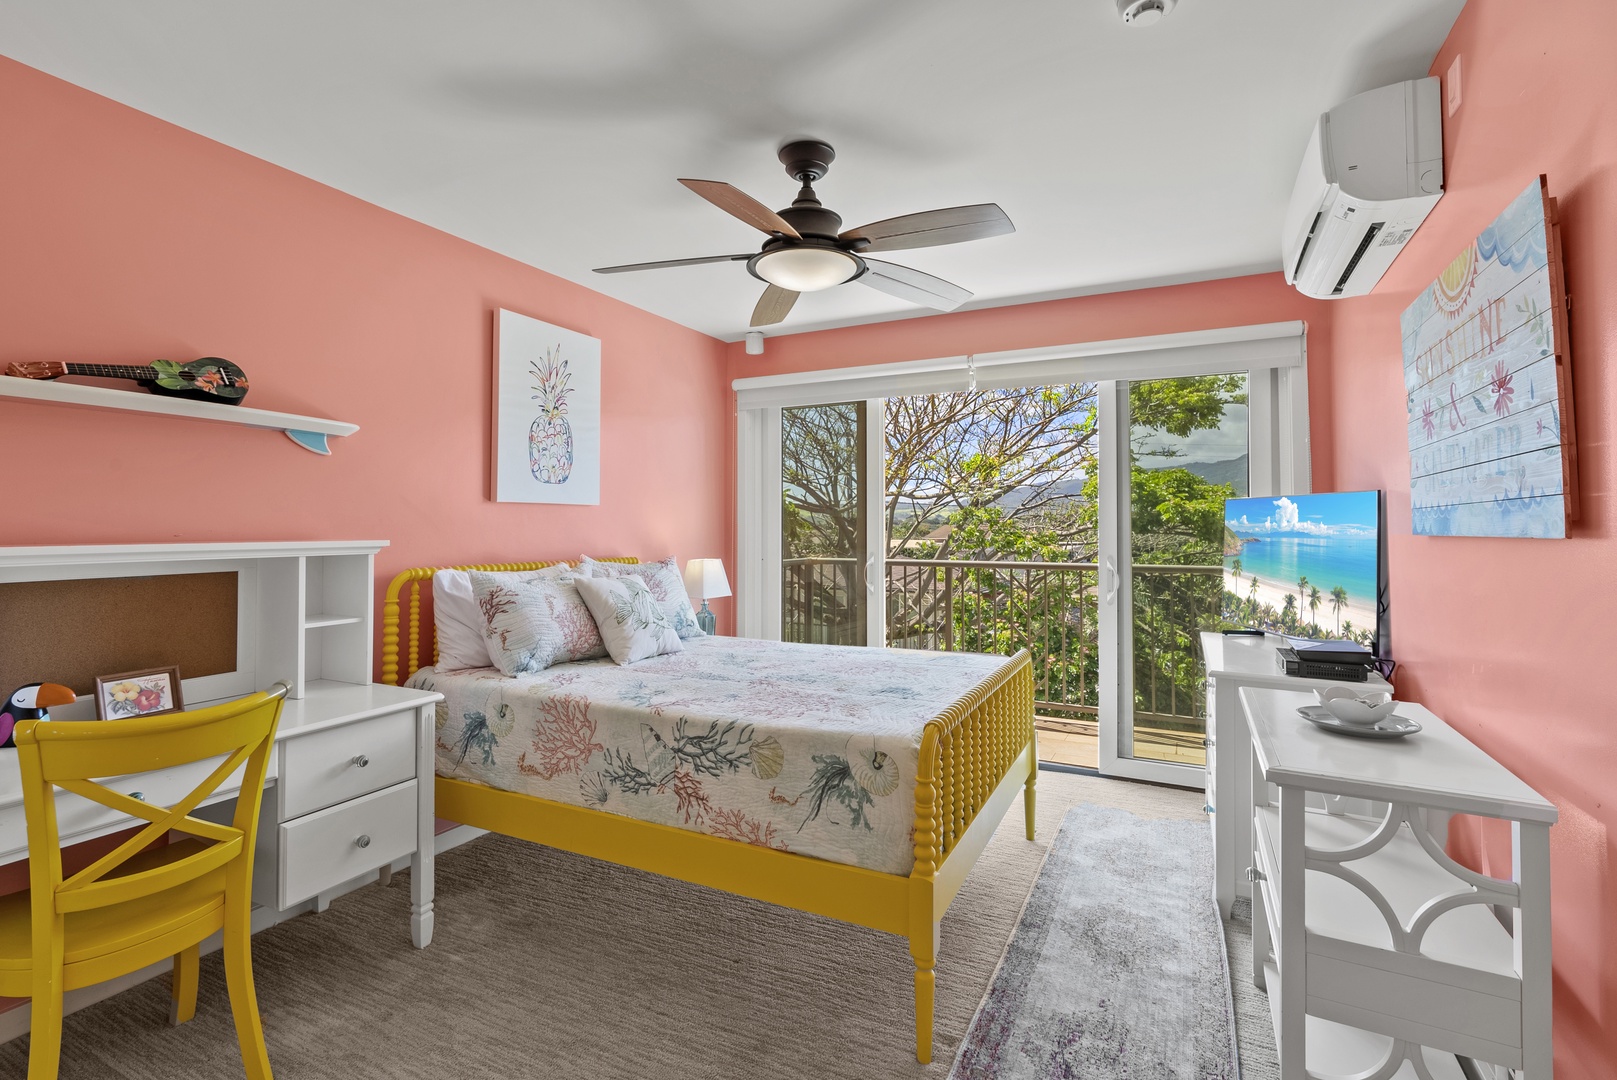 Waialua Vacation Rentals, Kala'iku Estate - Guest bedroom also comes with a desk and chair